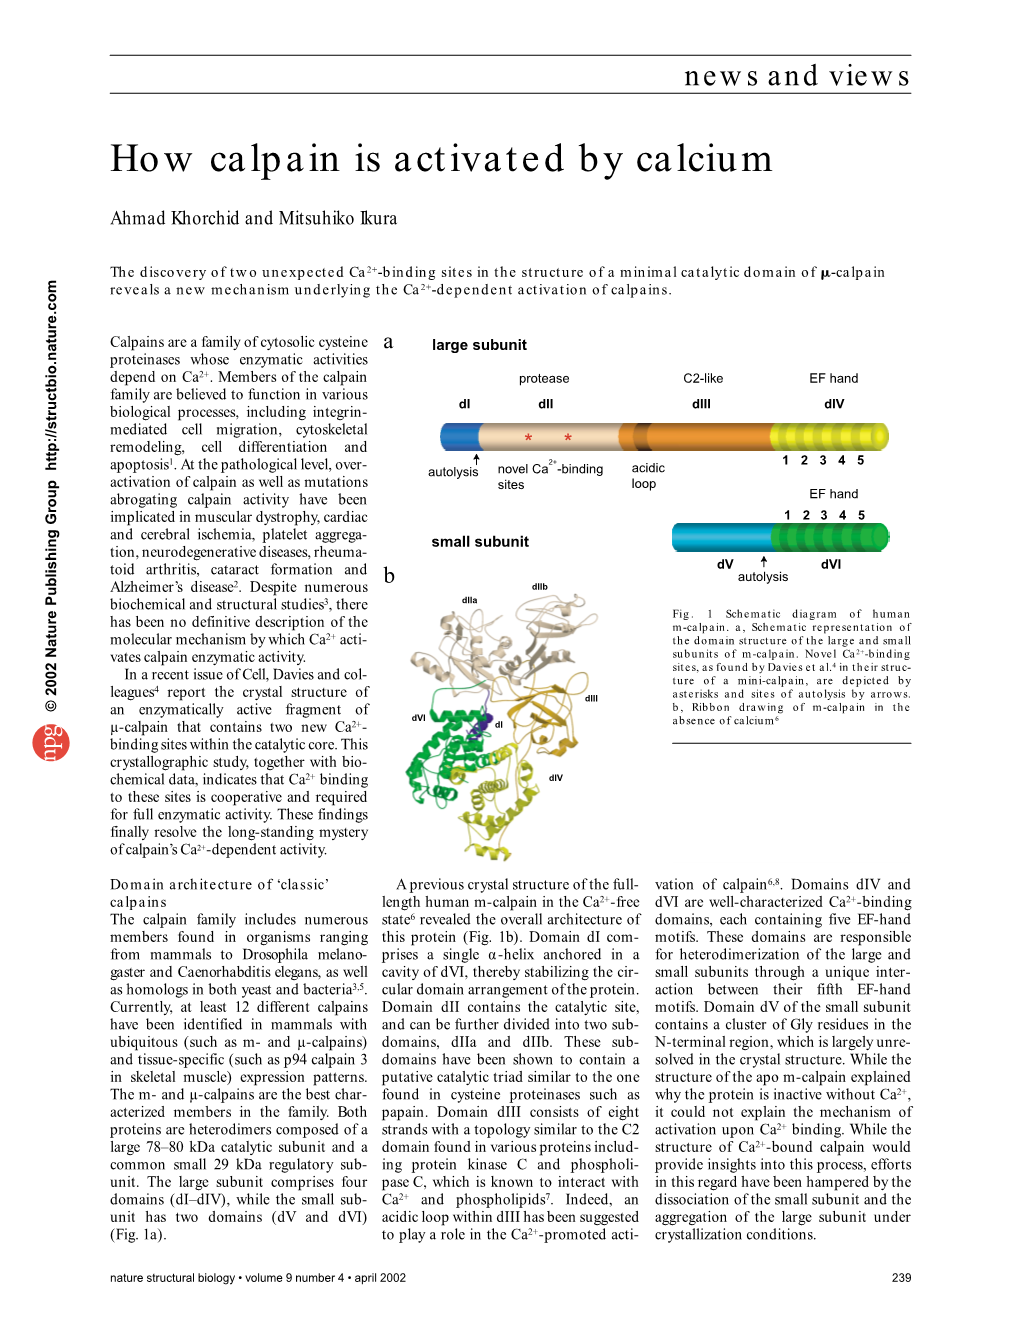 How Calpain Is Activated by Calcium